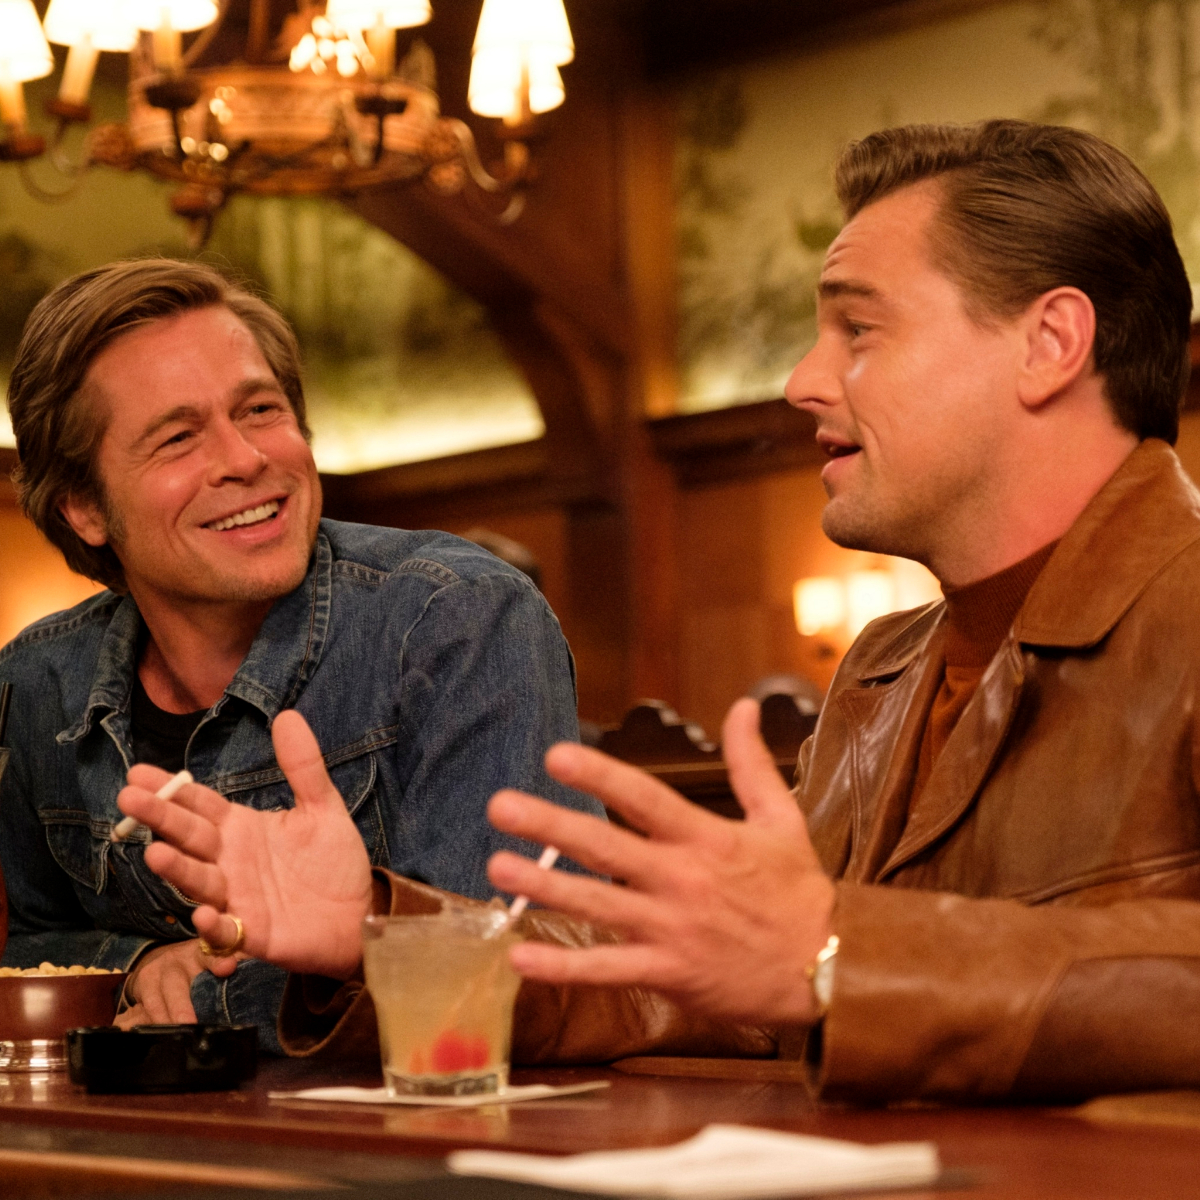 Once Upon A Time In Hollywood Review: Leonardo DiCaprio, Brad Pitt add colour to Quentin Tarantino's dark tale